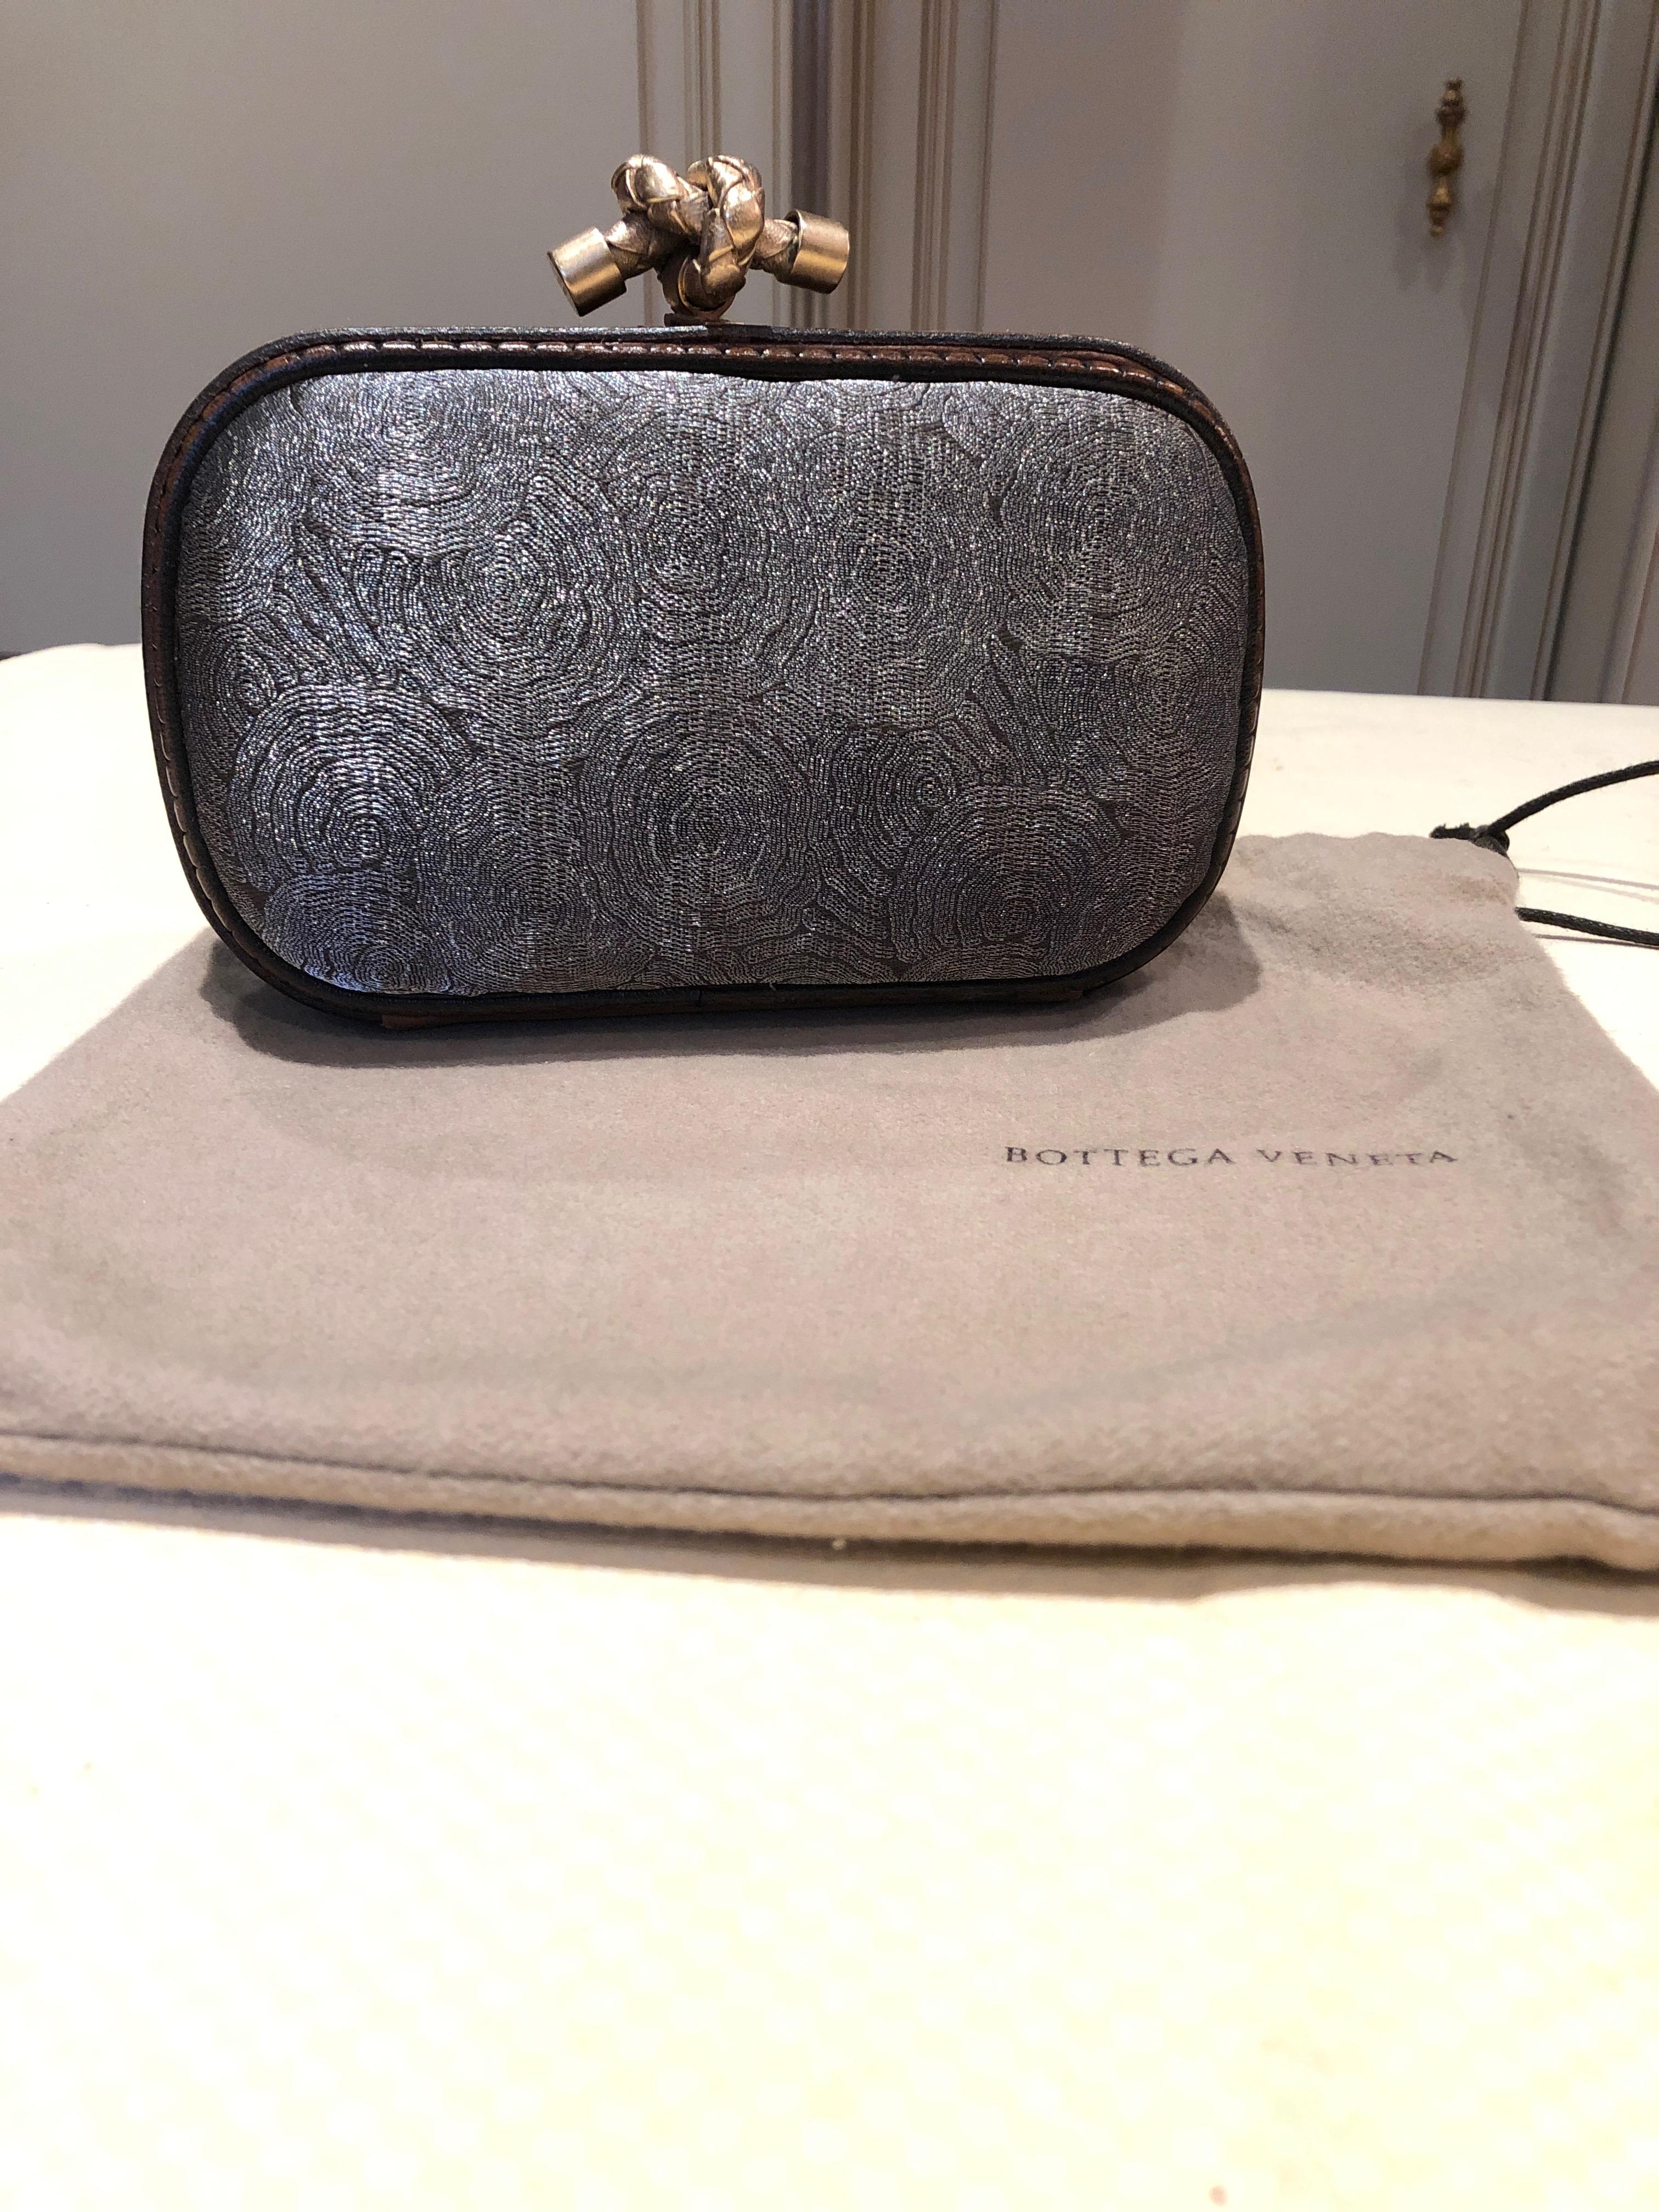 A supremely elegant clutch purse by Bottega Veneta, Limited Edition, with grey metal threads and luxurious brass knot to open and close. Lined in buttery leather. All the best materials and workmanship. A jewel. Maybe used once.
 